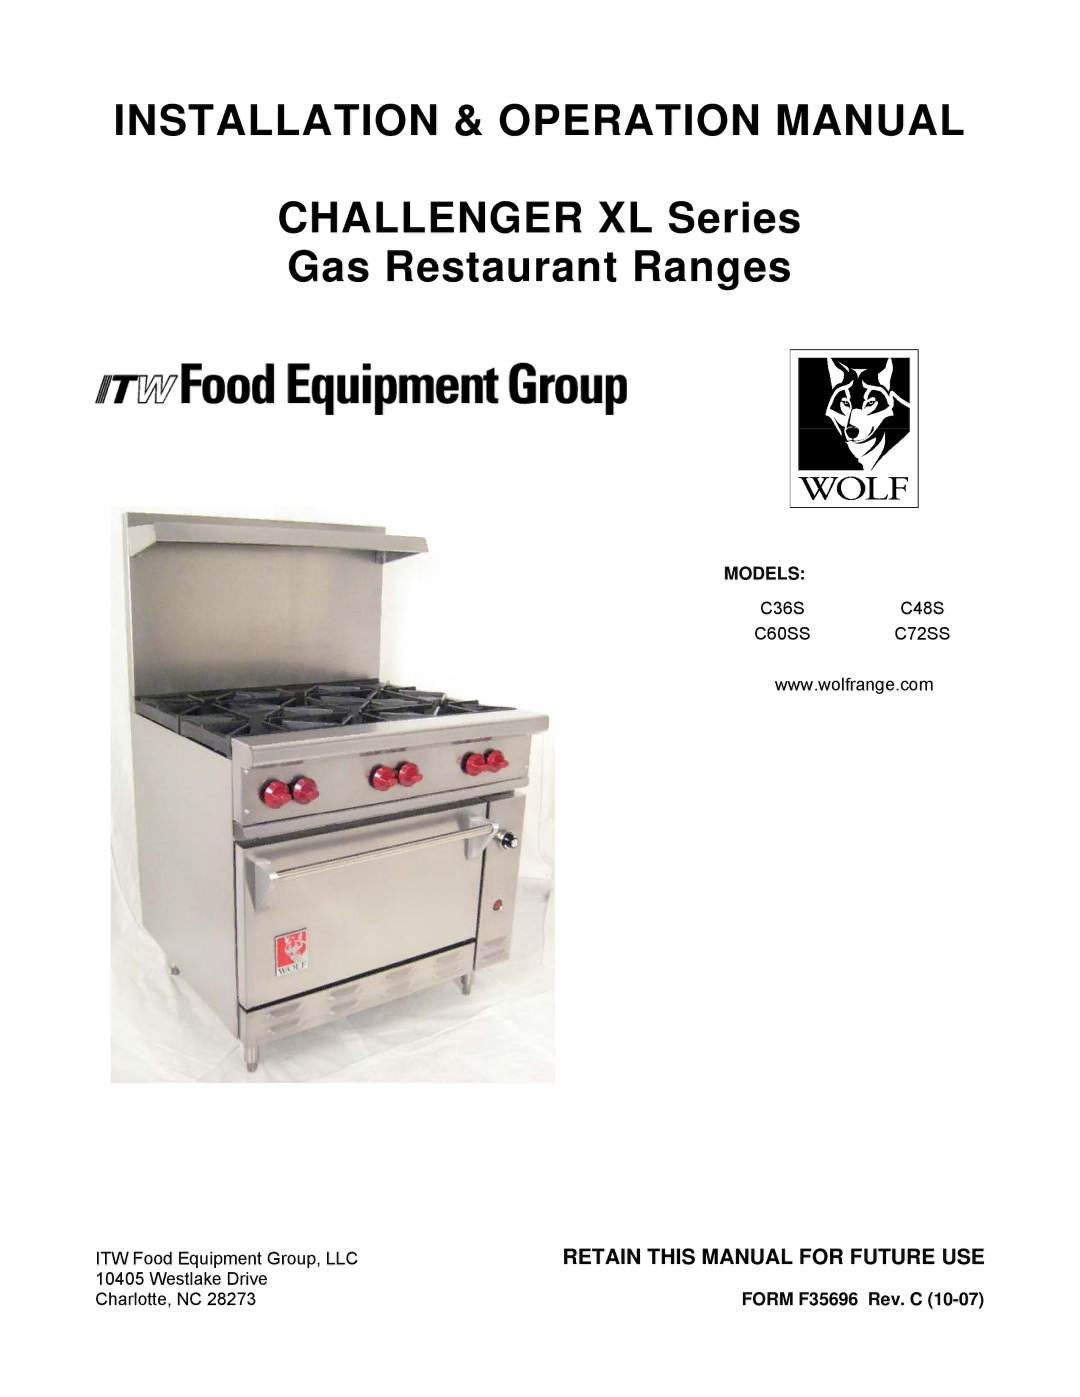 Wolf C72SS operation manual Challenger XL Series Gas Restaurant Ranges, Retain this Manual for Future USE 